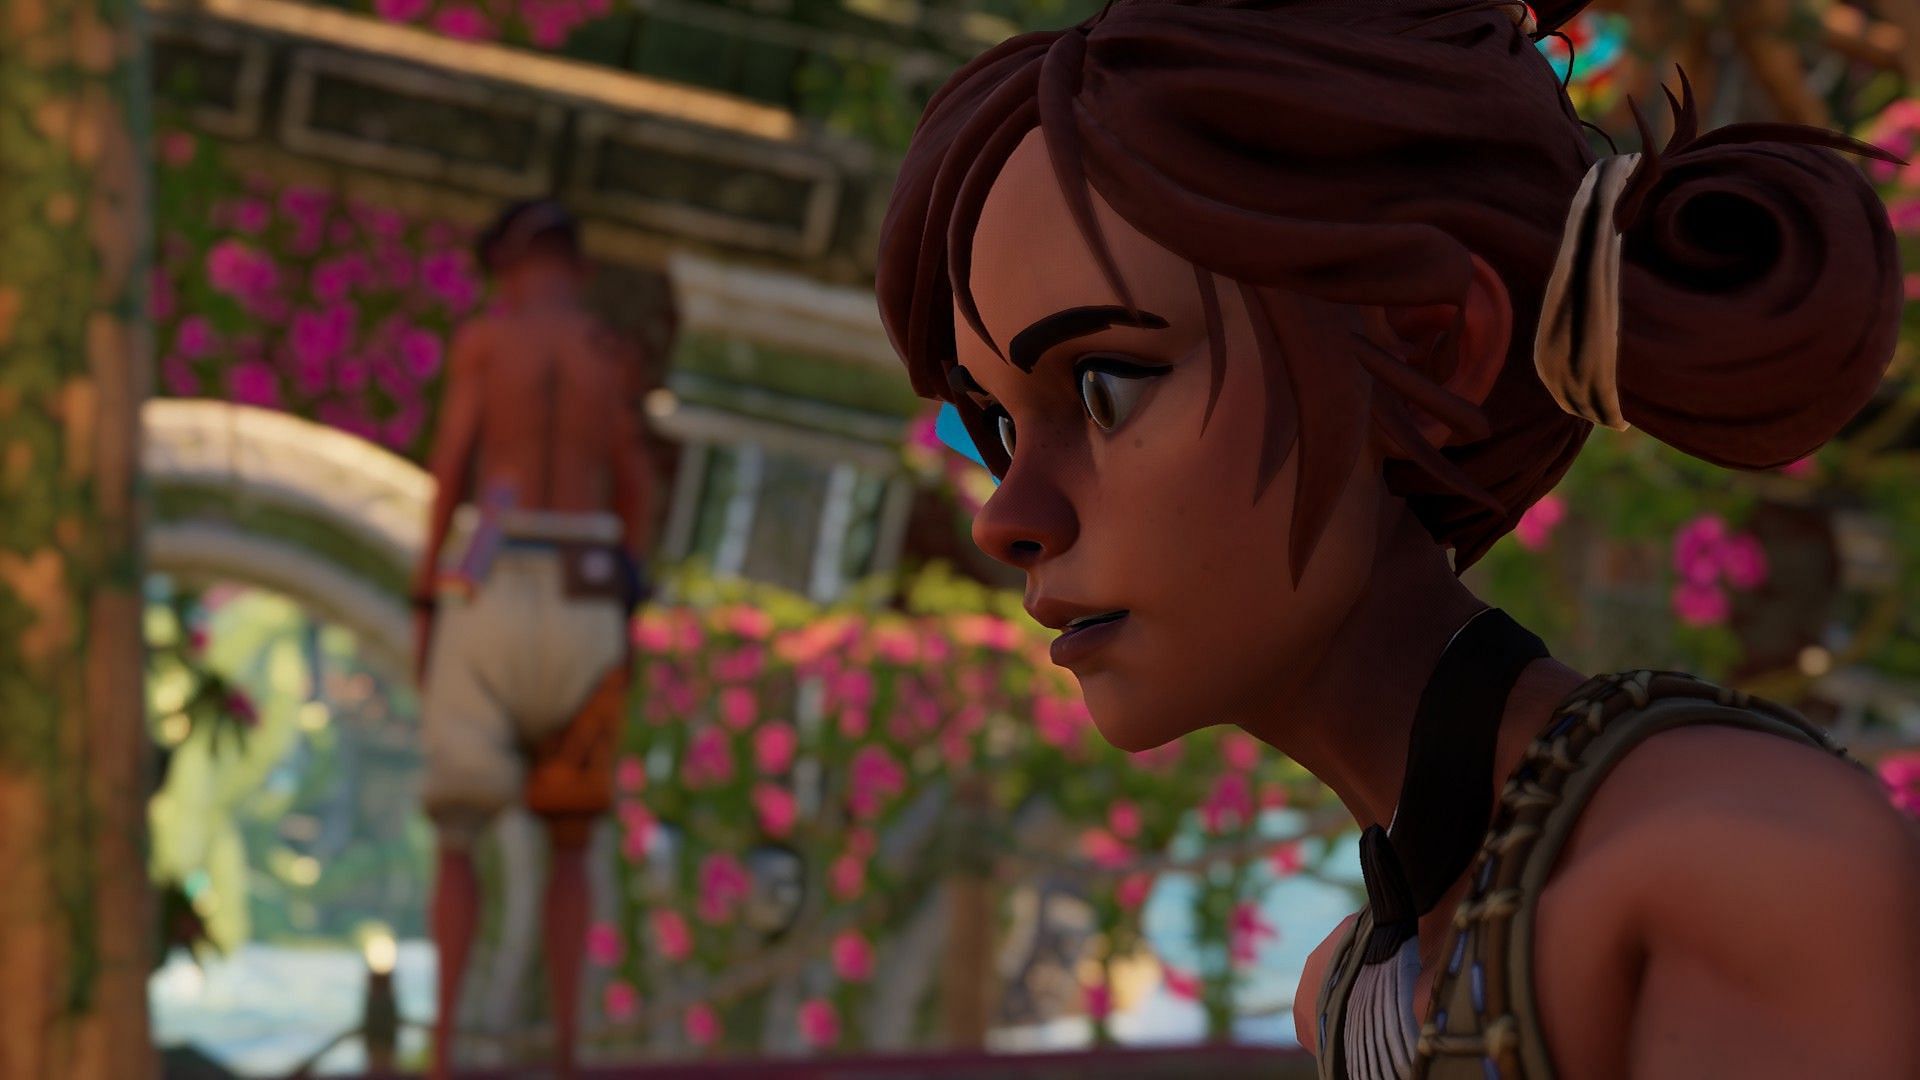 The cutscenes deploy a cinematic depth-of-field effect for the background (Screenshot from Submerged: Hidden Depths)